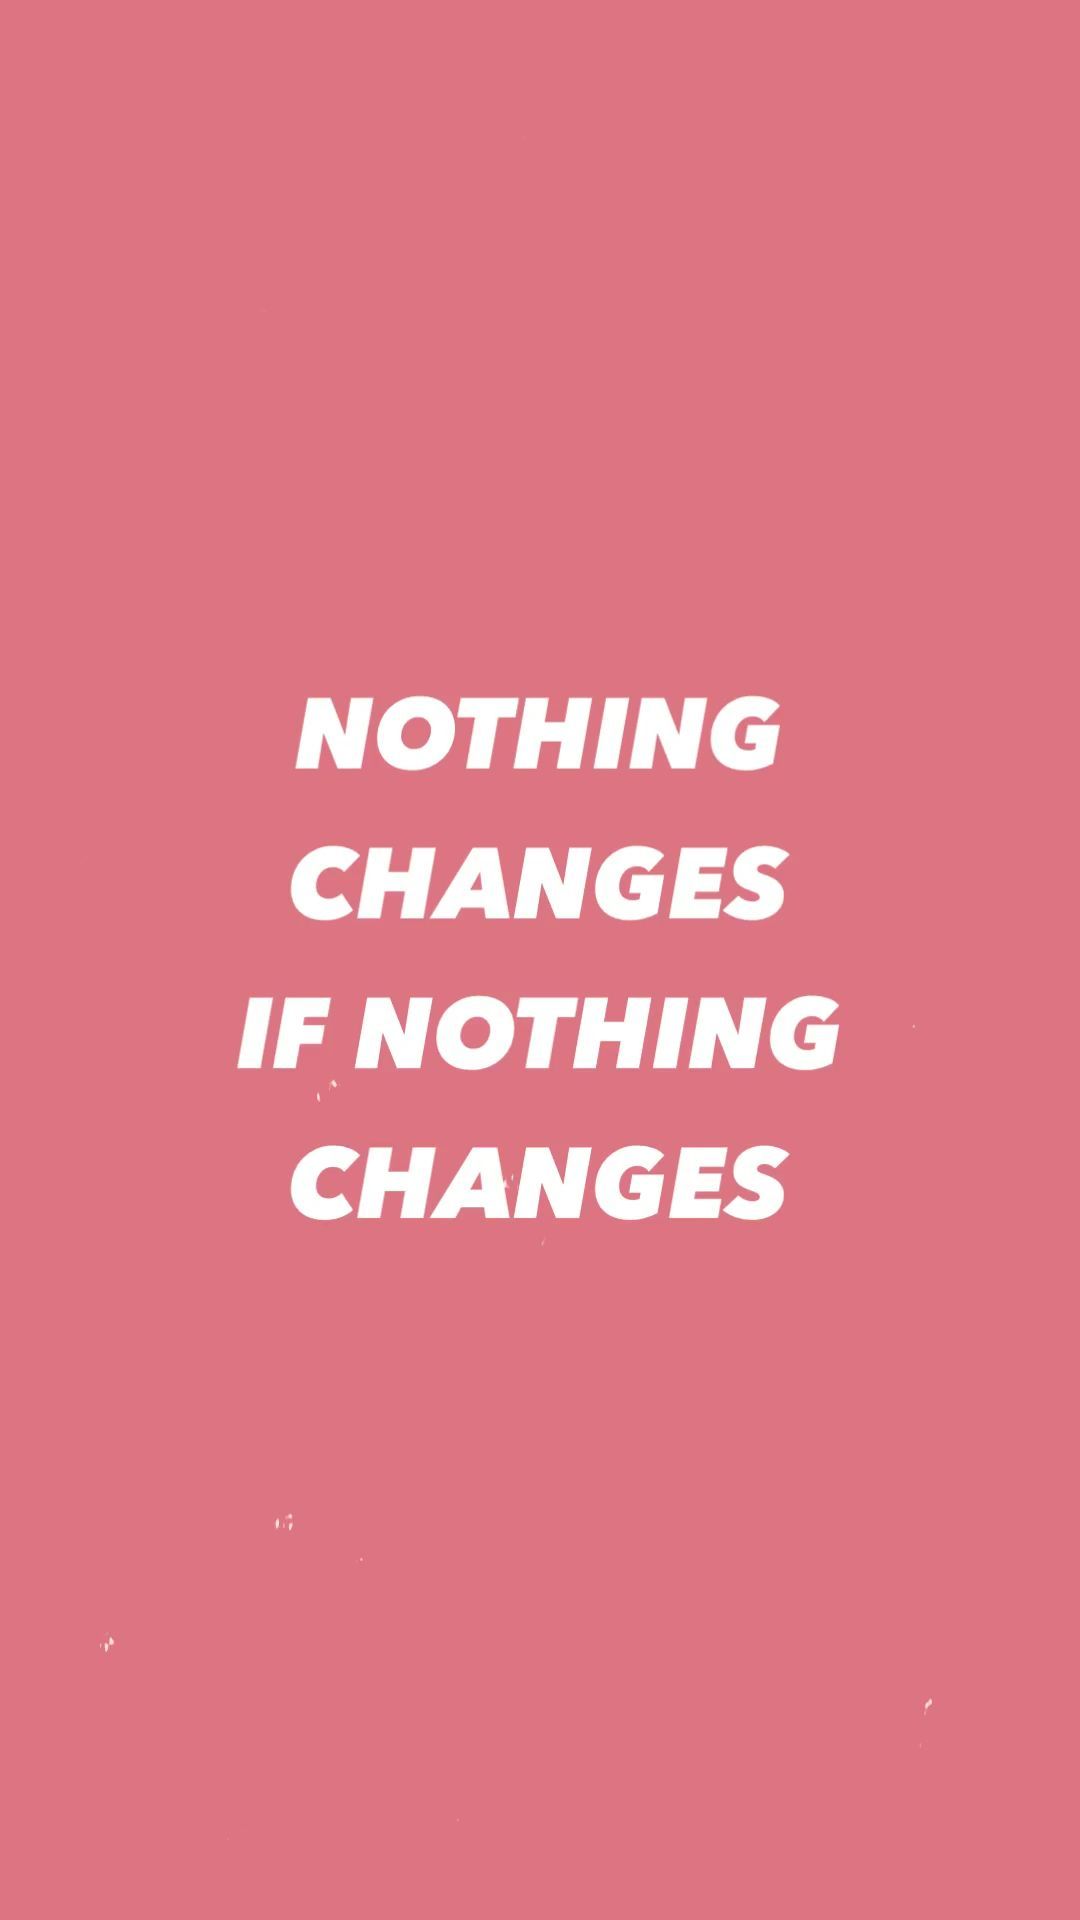 Motivational quote - nothing changes - Motivational quote - nothing changes -   beauty Secrets quotes